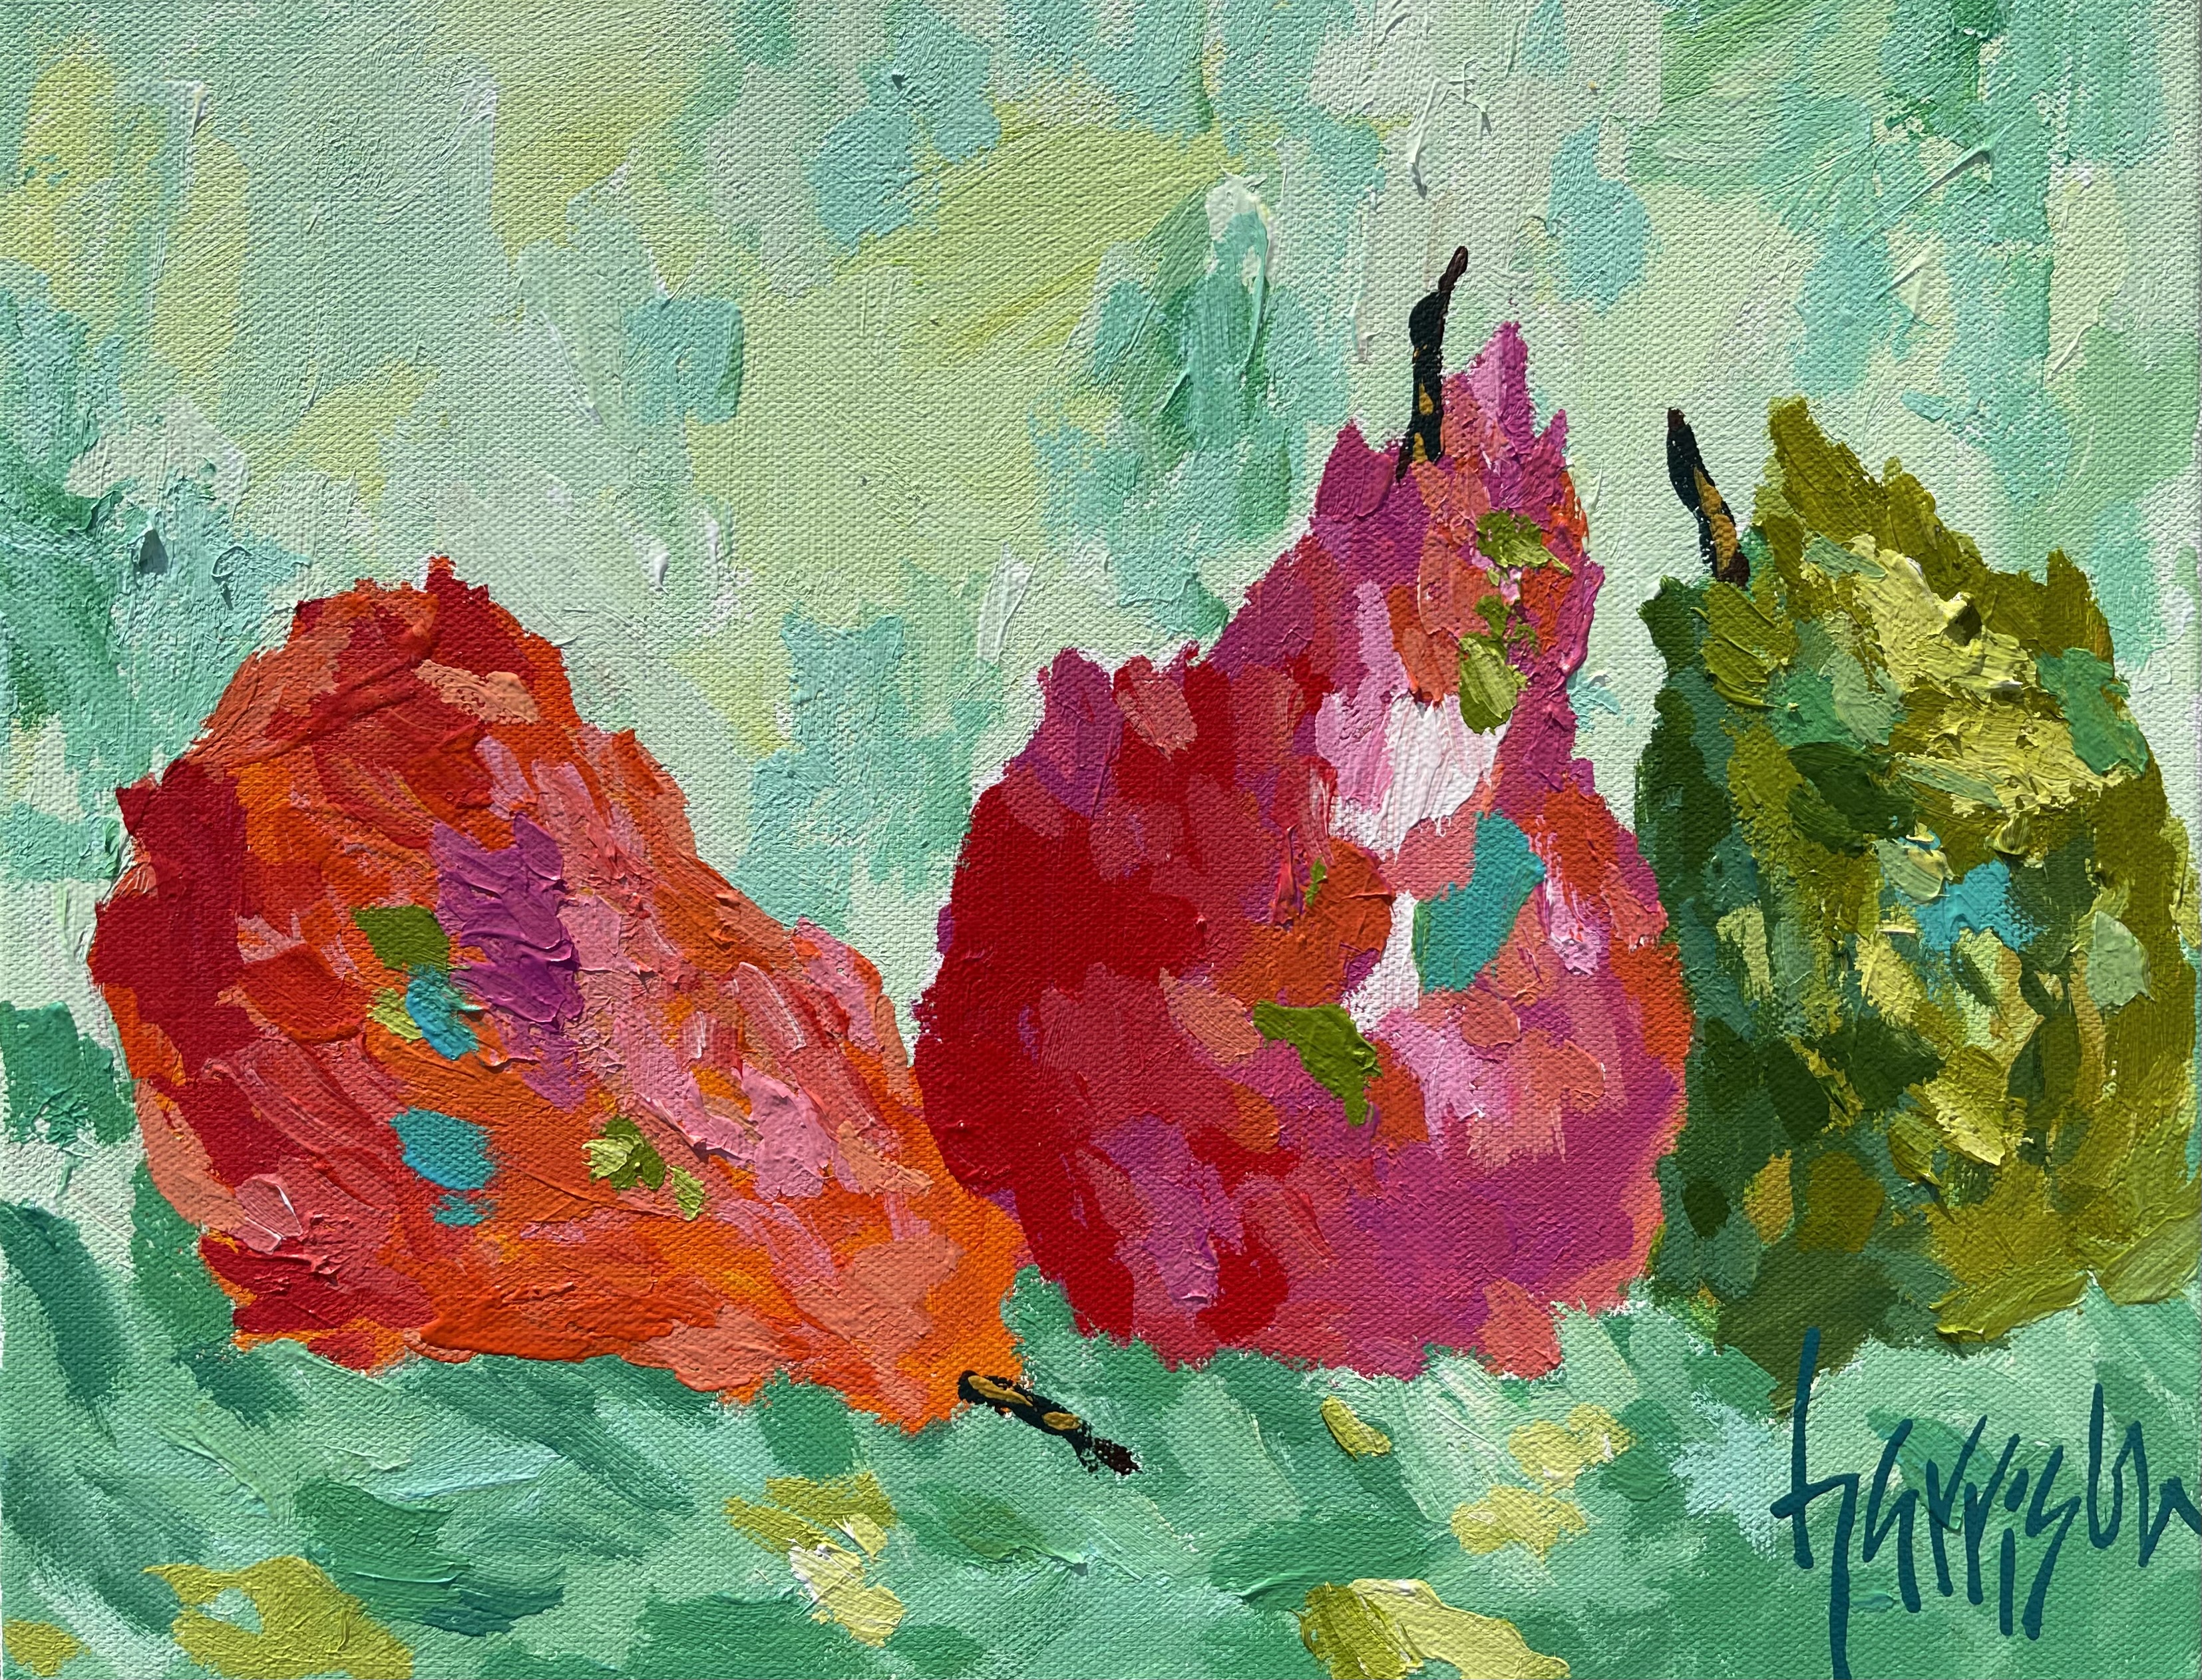 HOLIDAYS IN PROVENCE 5 - 14"w x 11"h 